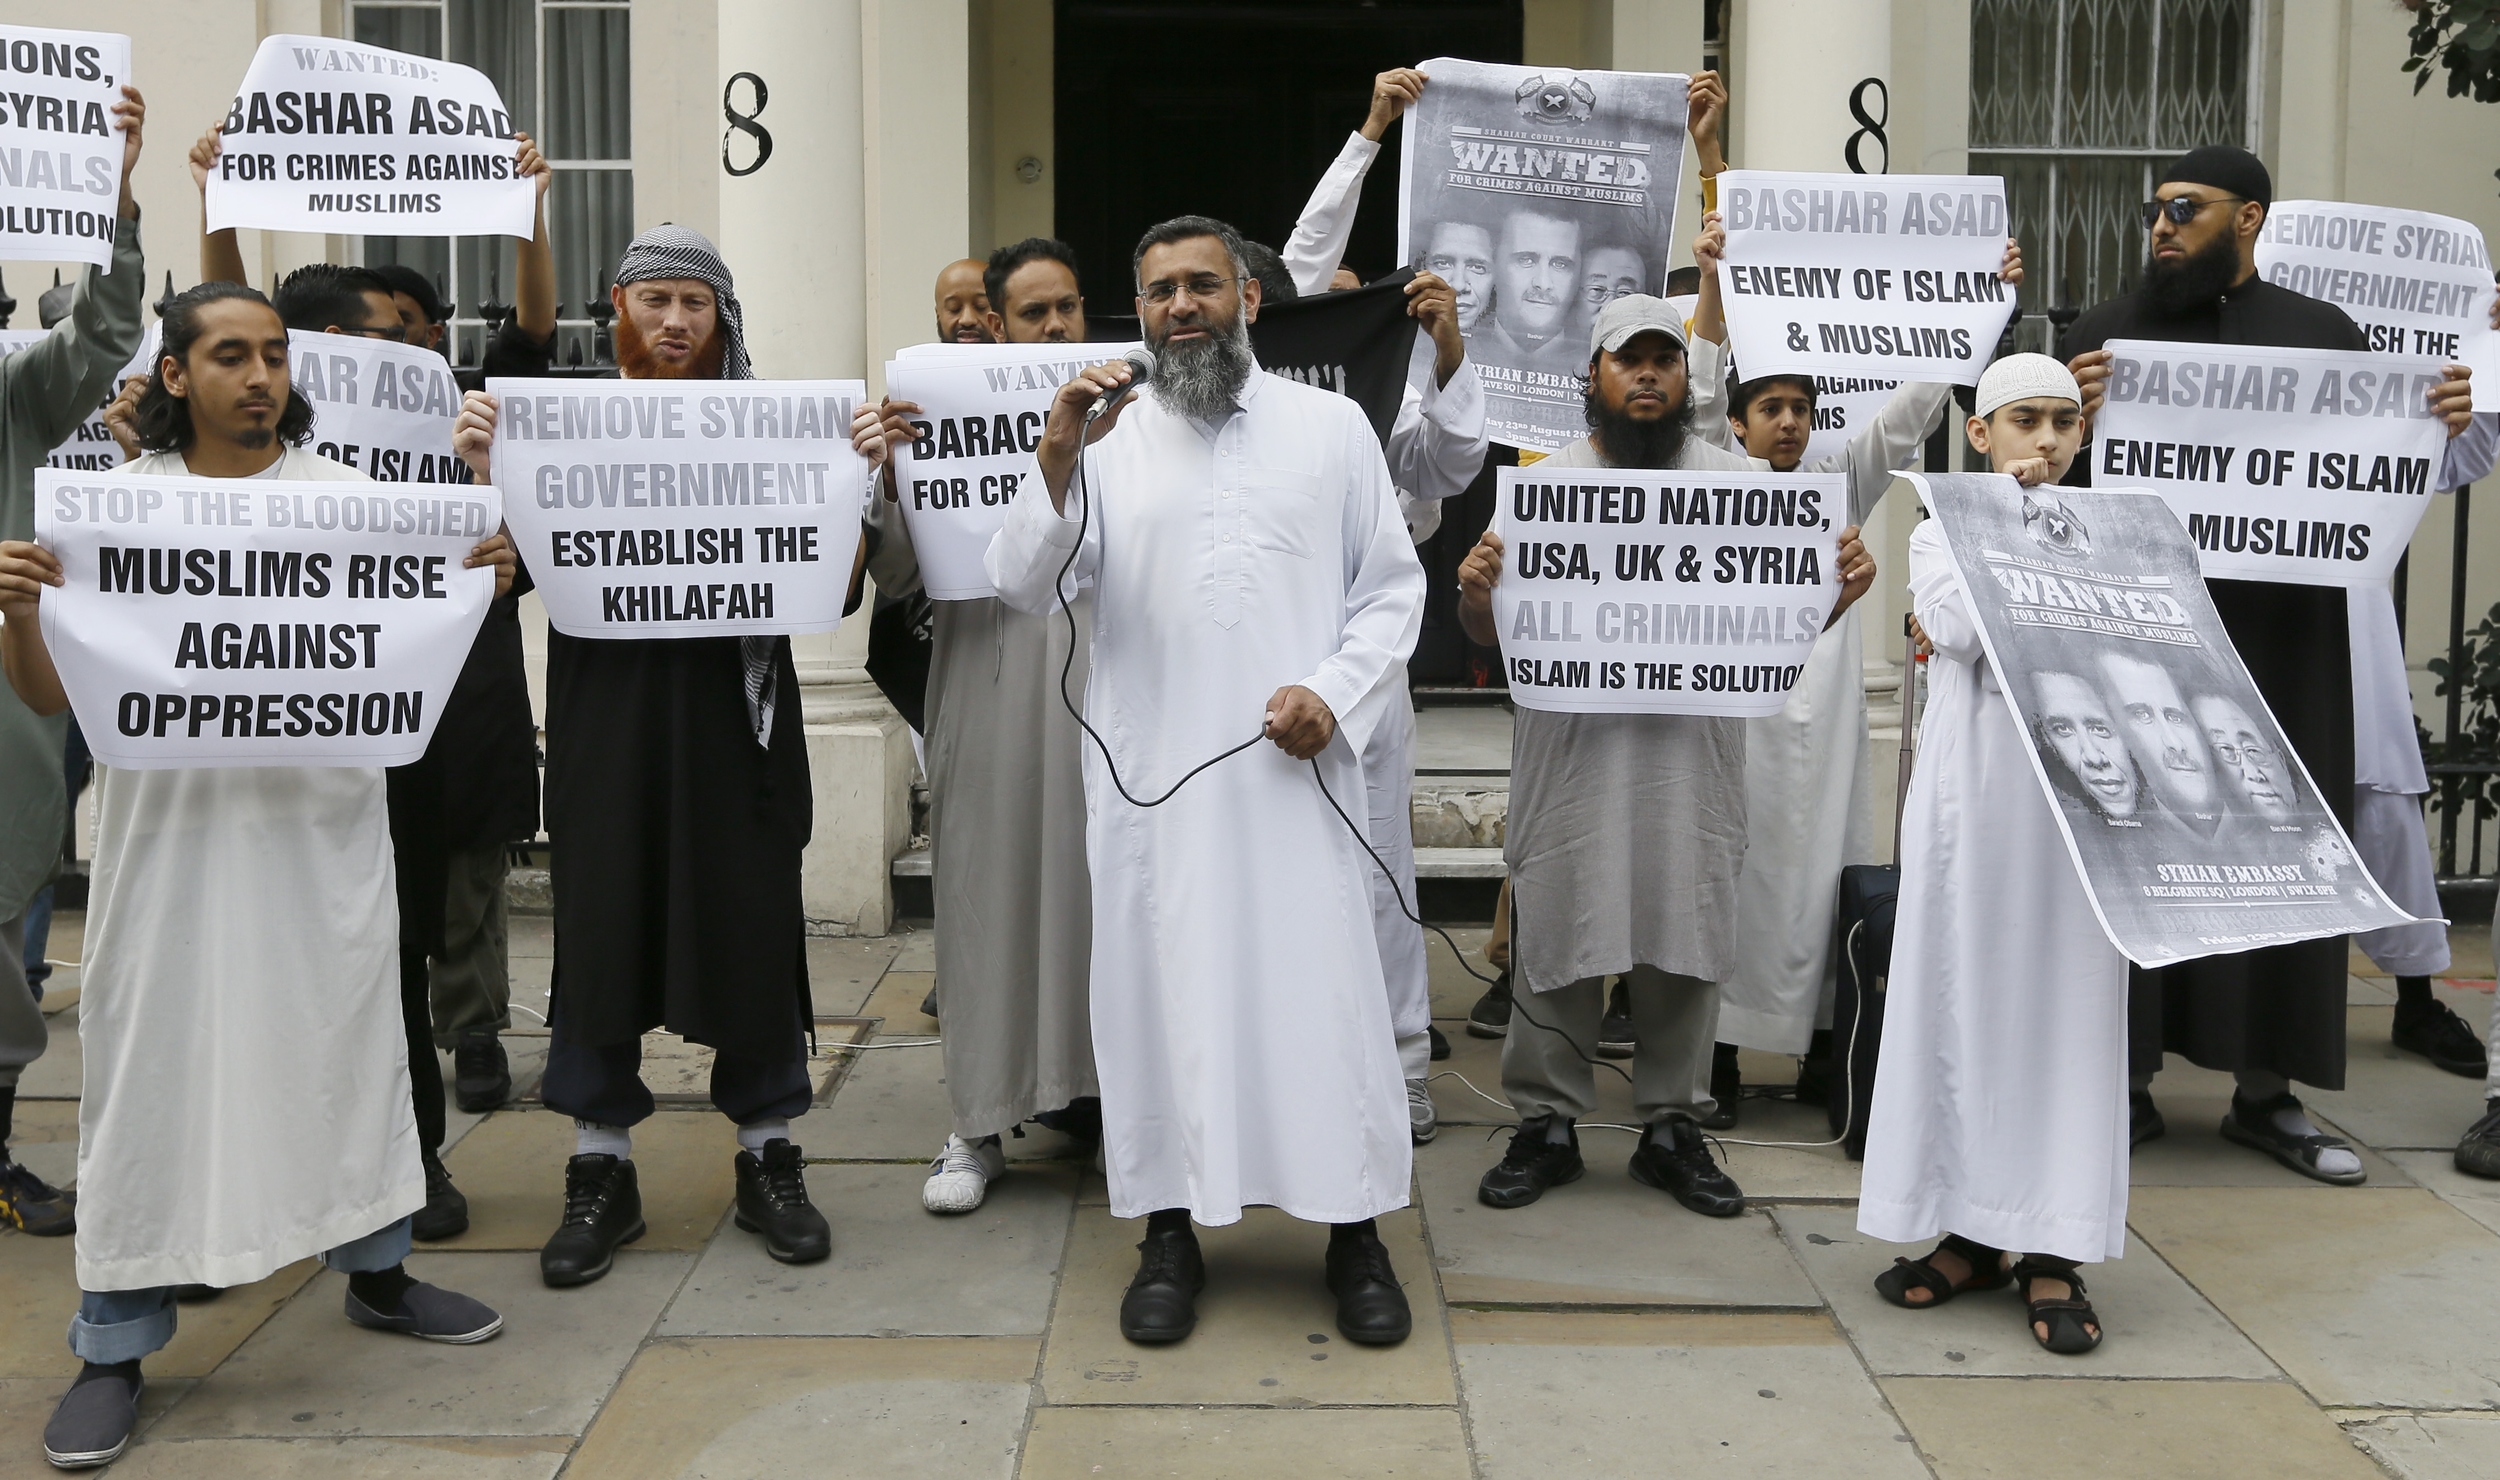 anjem-choudary-holds-a-protest-in-front-of-the-embassy-of-syria-in-london.jpg